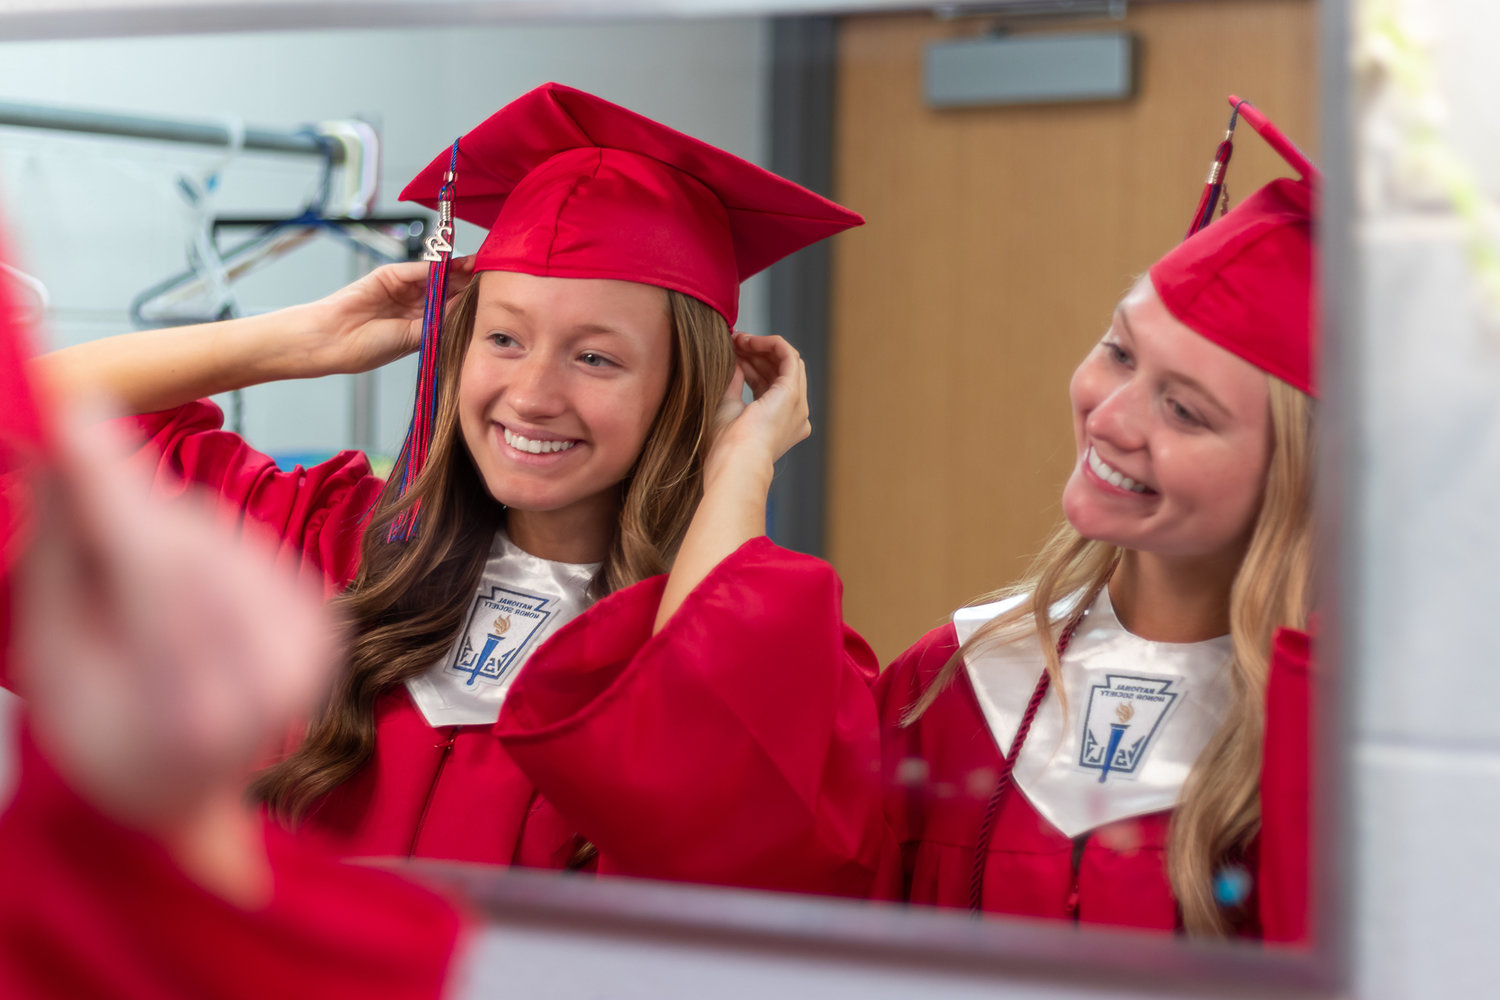 PREPARING FOR THE BIG STAGE at the Clinton High School graduation ceremony, Ashley Berry and Sophie Schilling tried on their caps and gowns on Monday.